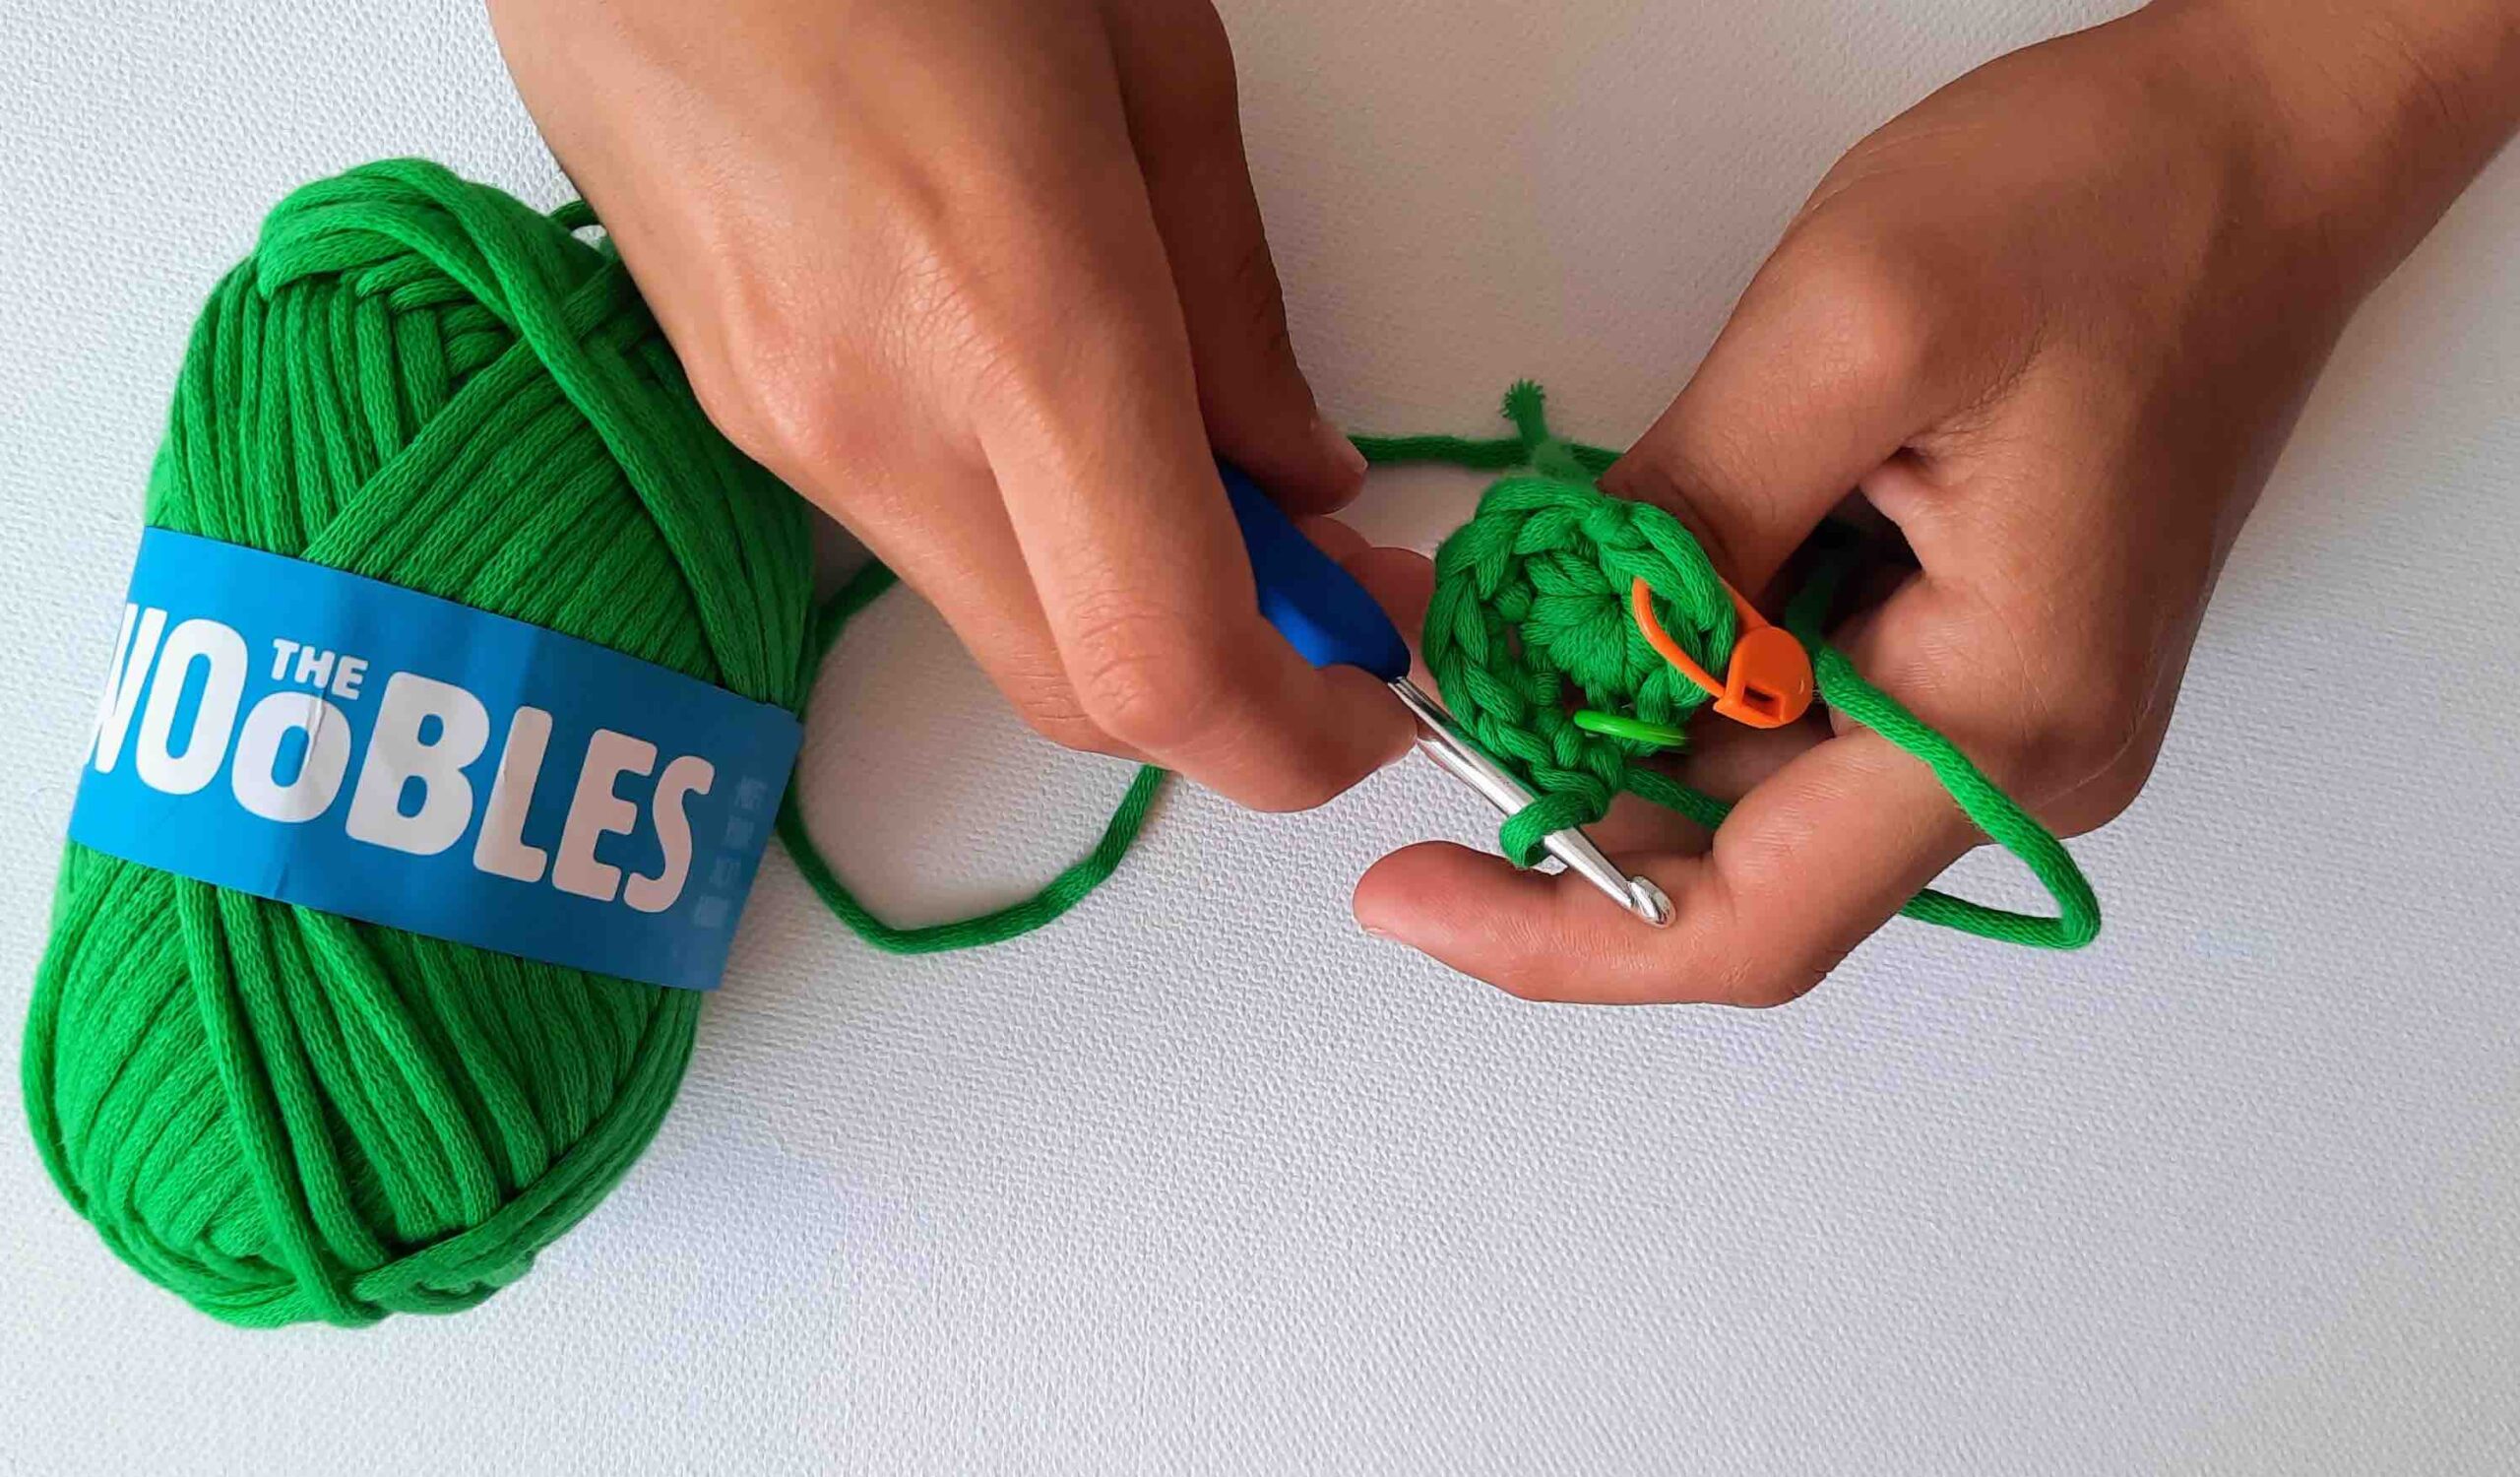 The Woobles Crochet Kit Review Fred The Dinosaur.